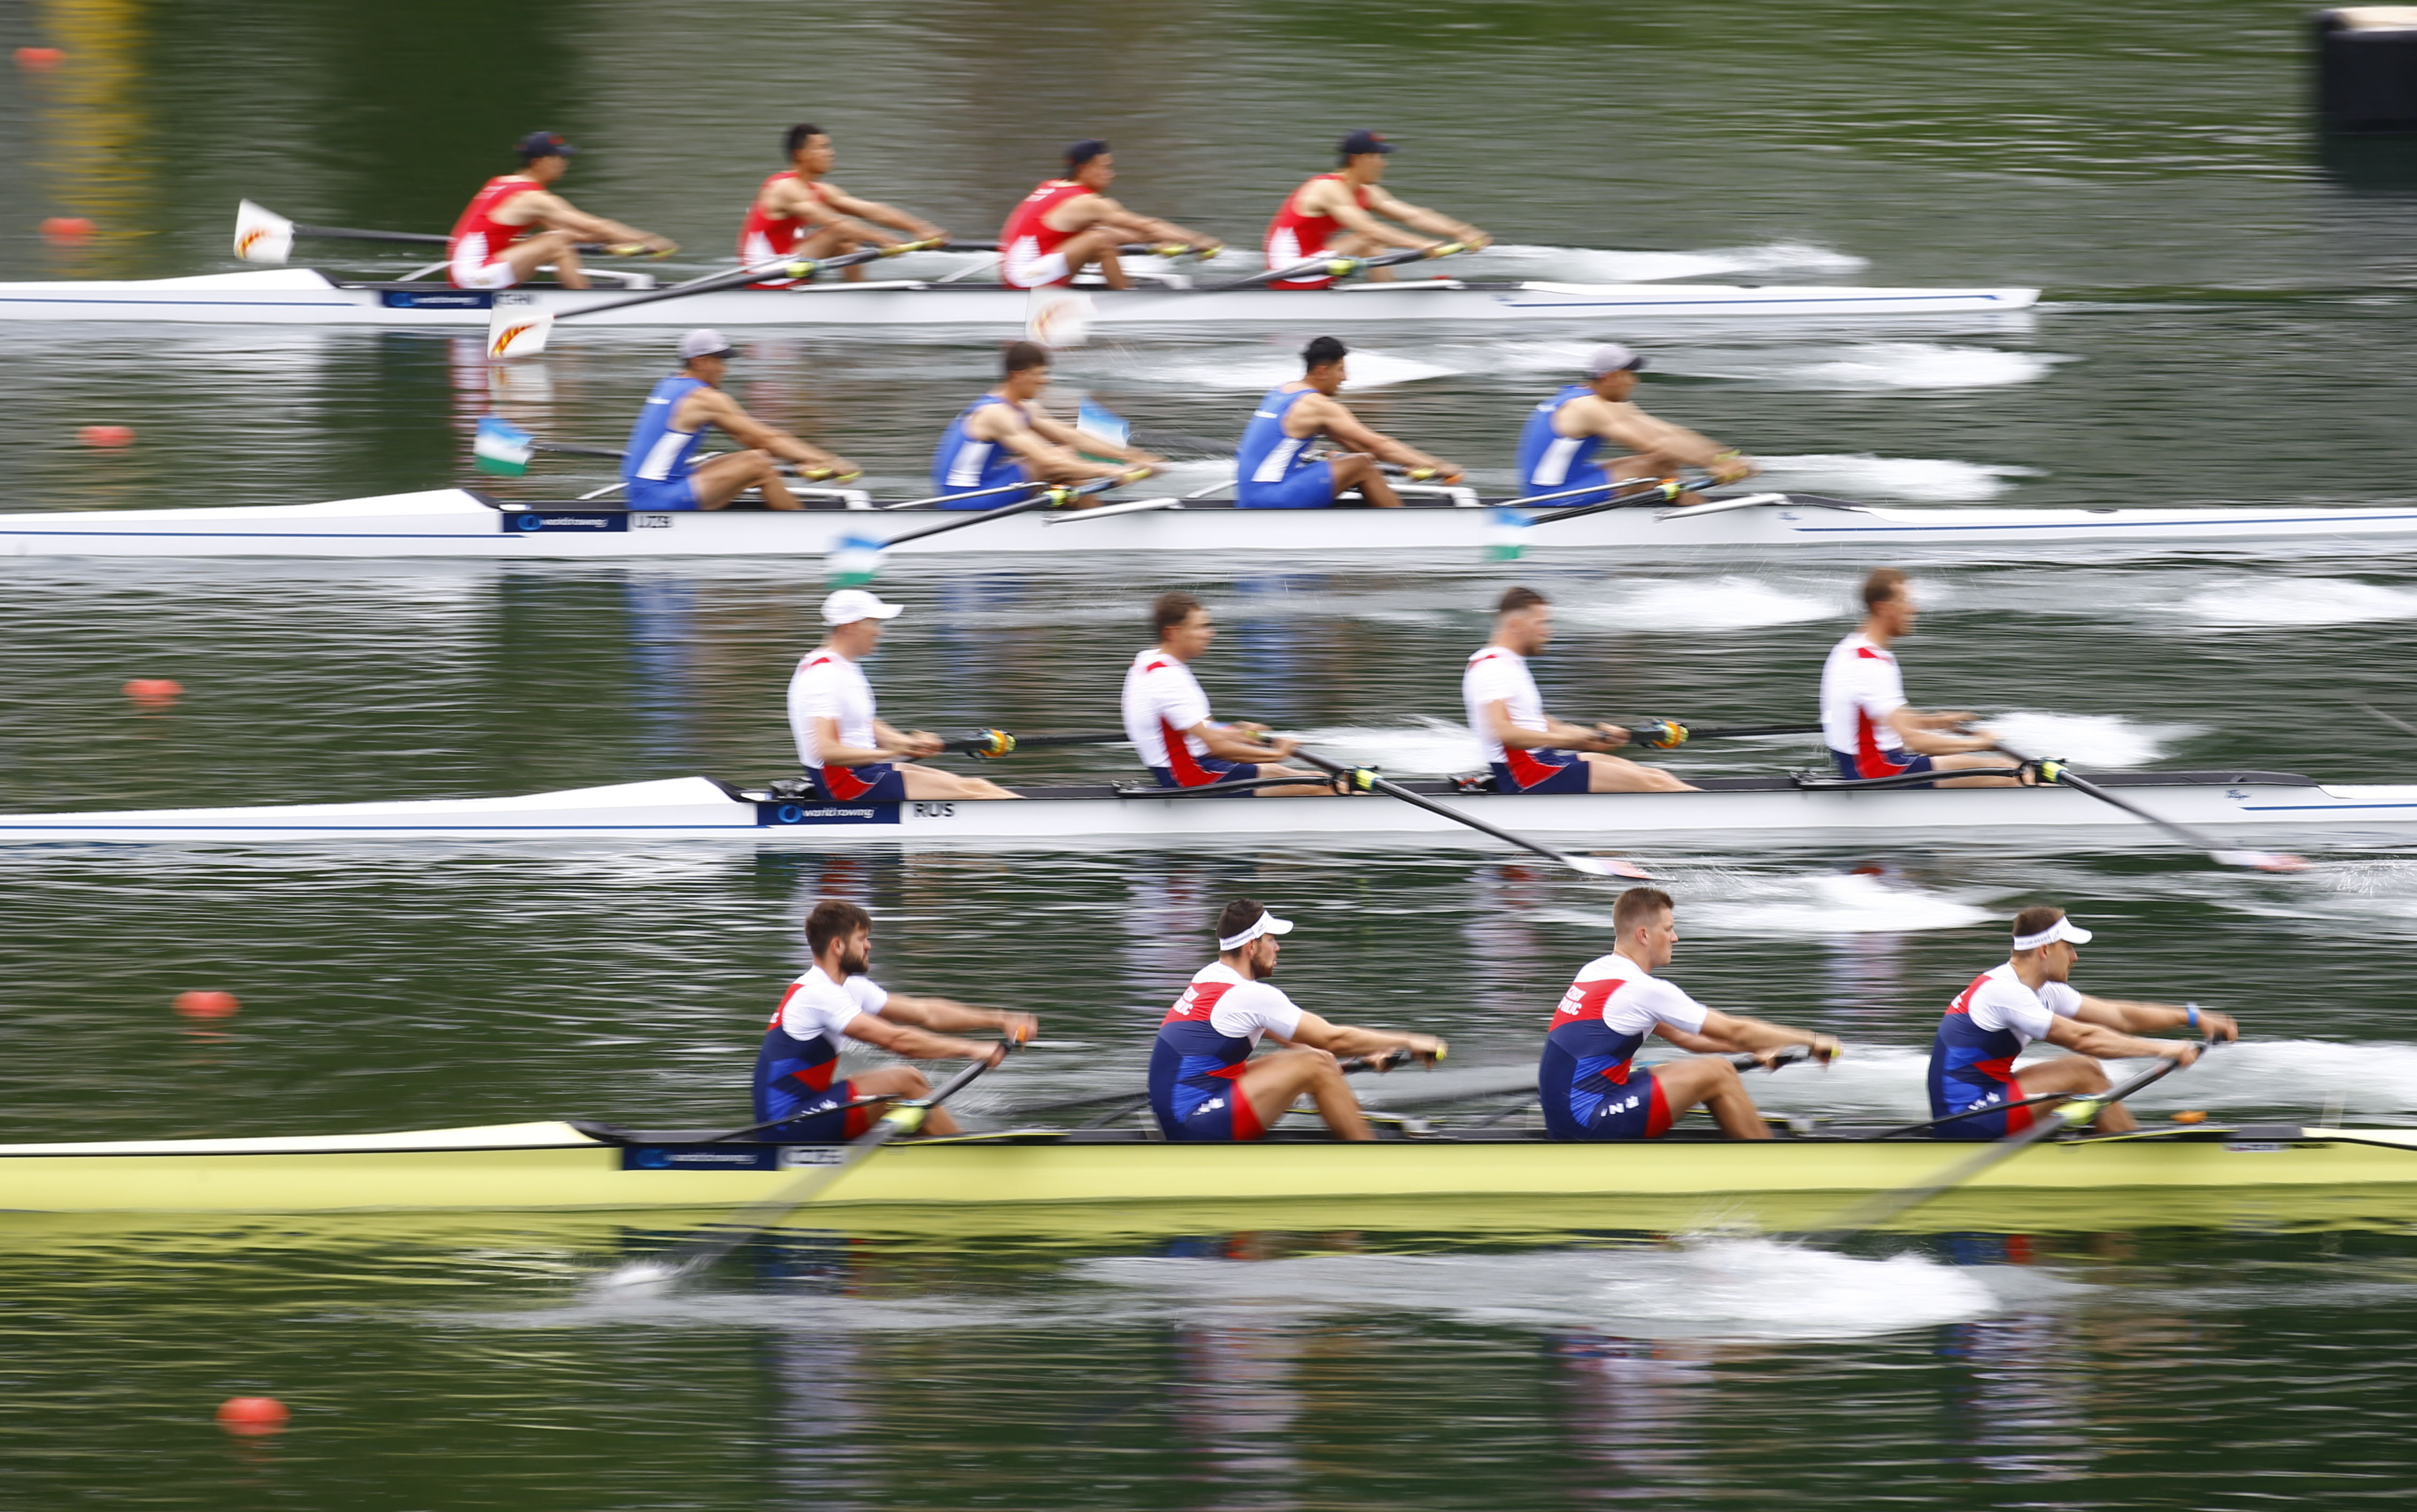 World Rowing Cup heads to Lucerne